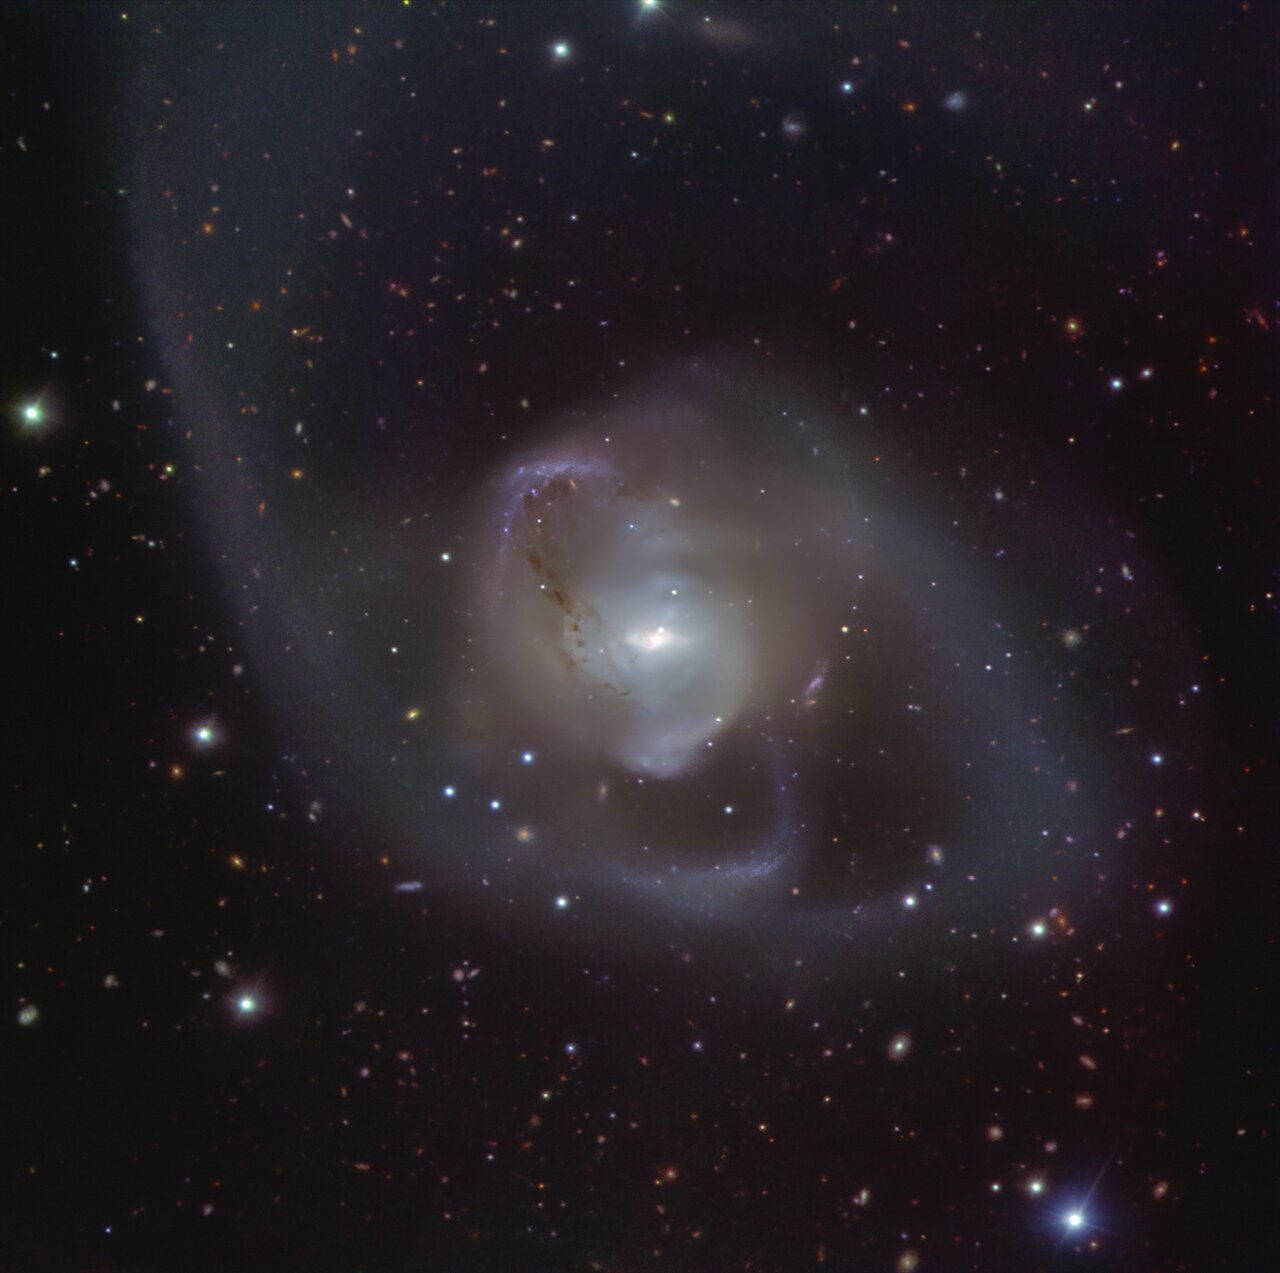 ESO’s Very Large Telescope captures spectacular cosmic dance